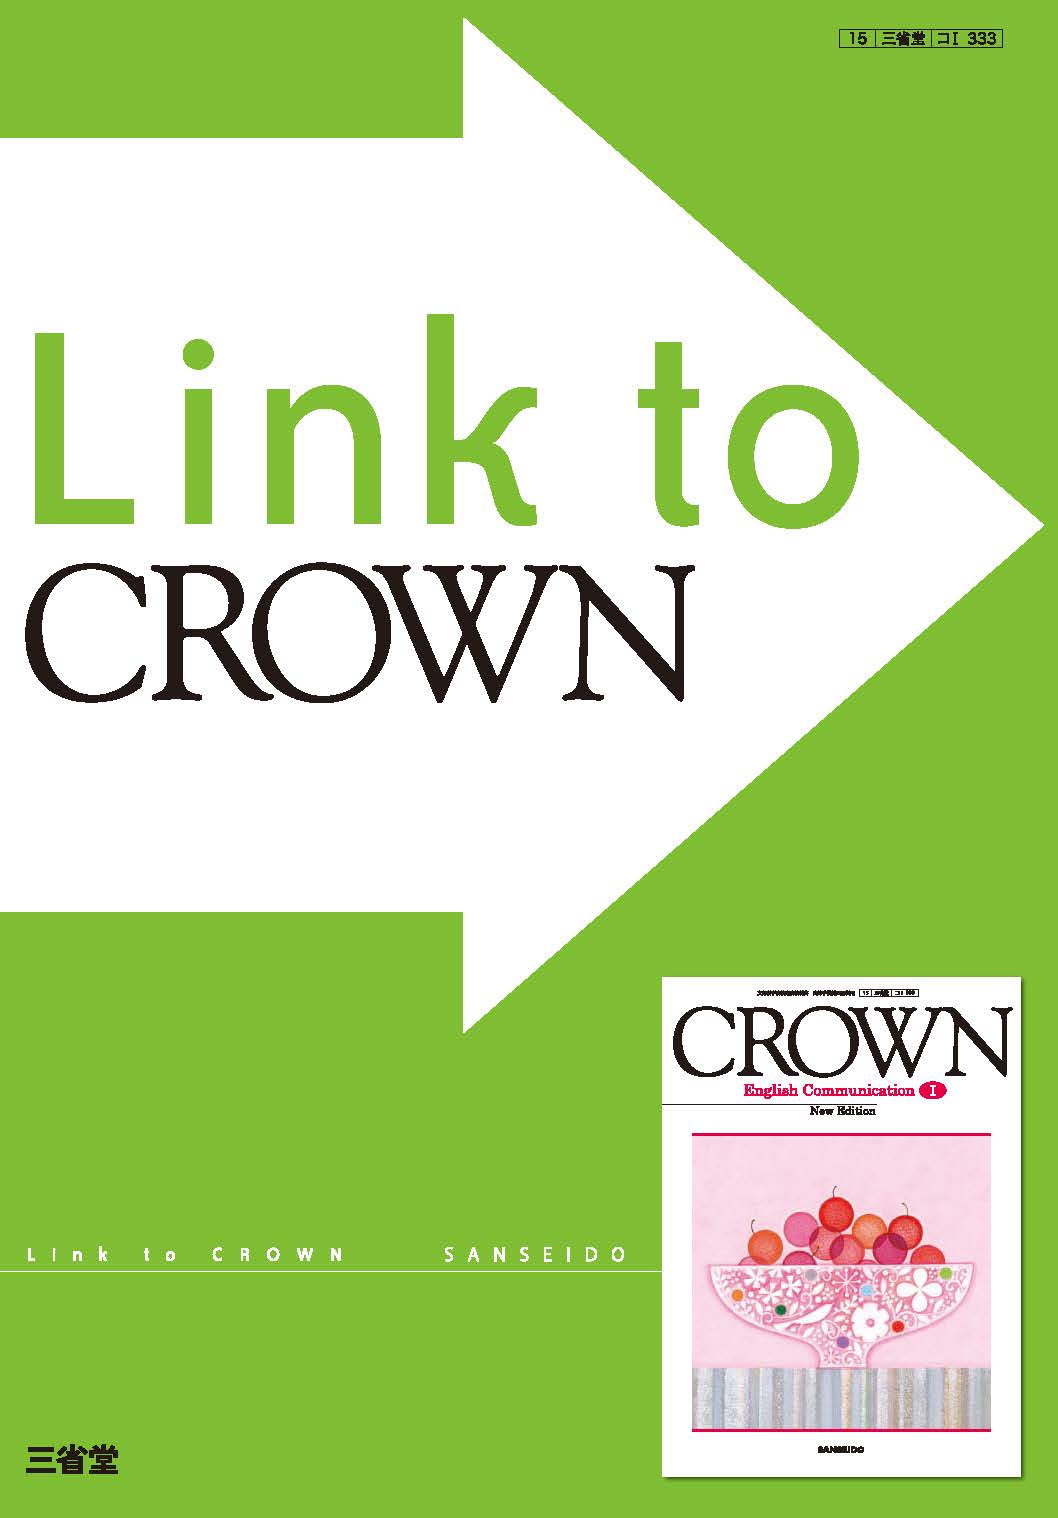 Link to CROWN